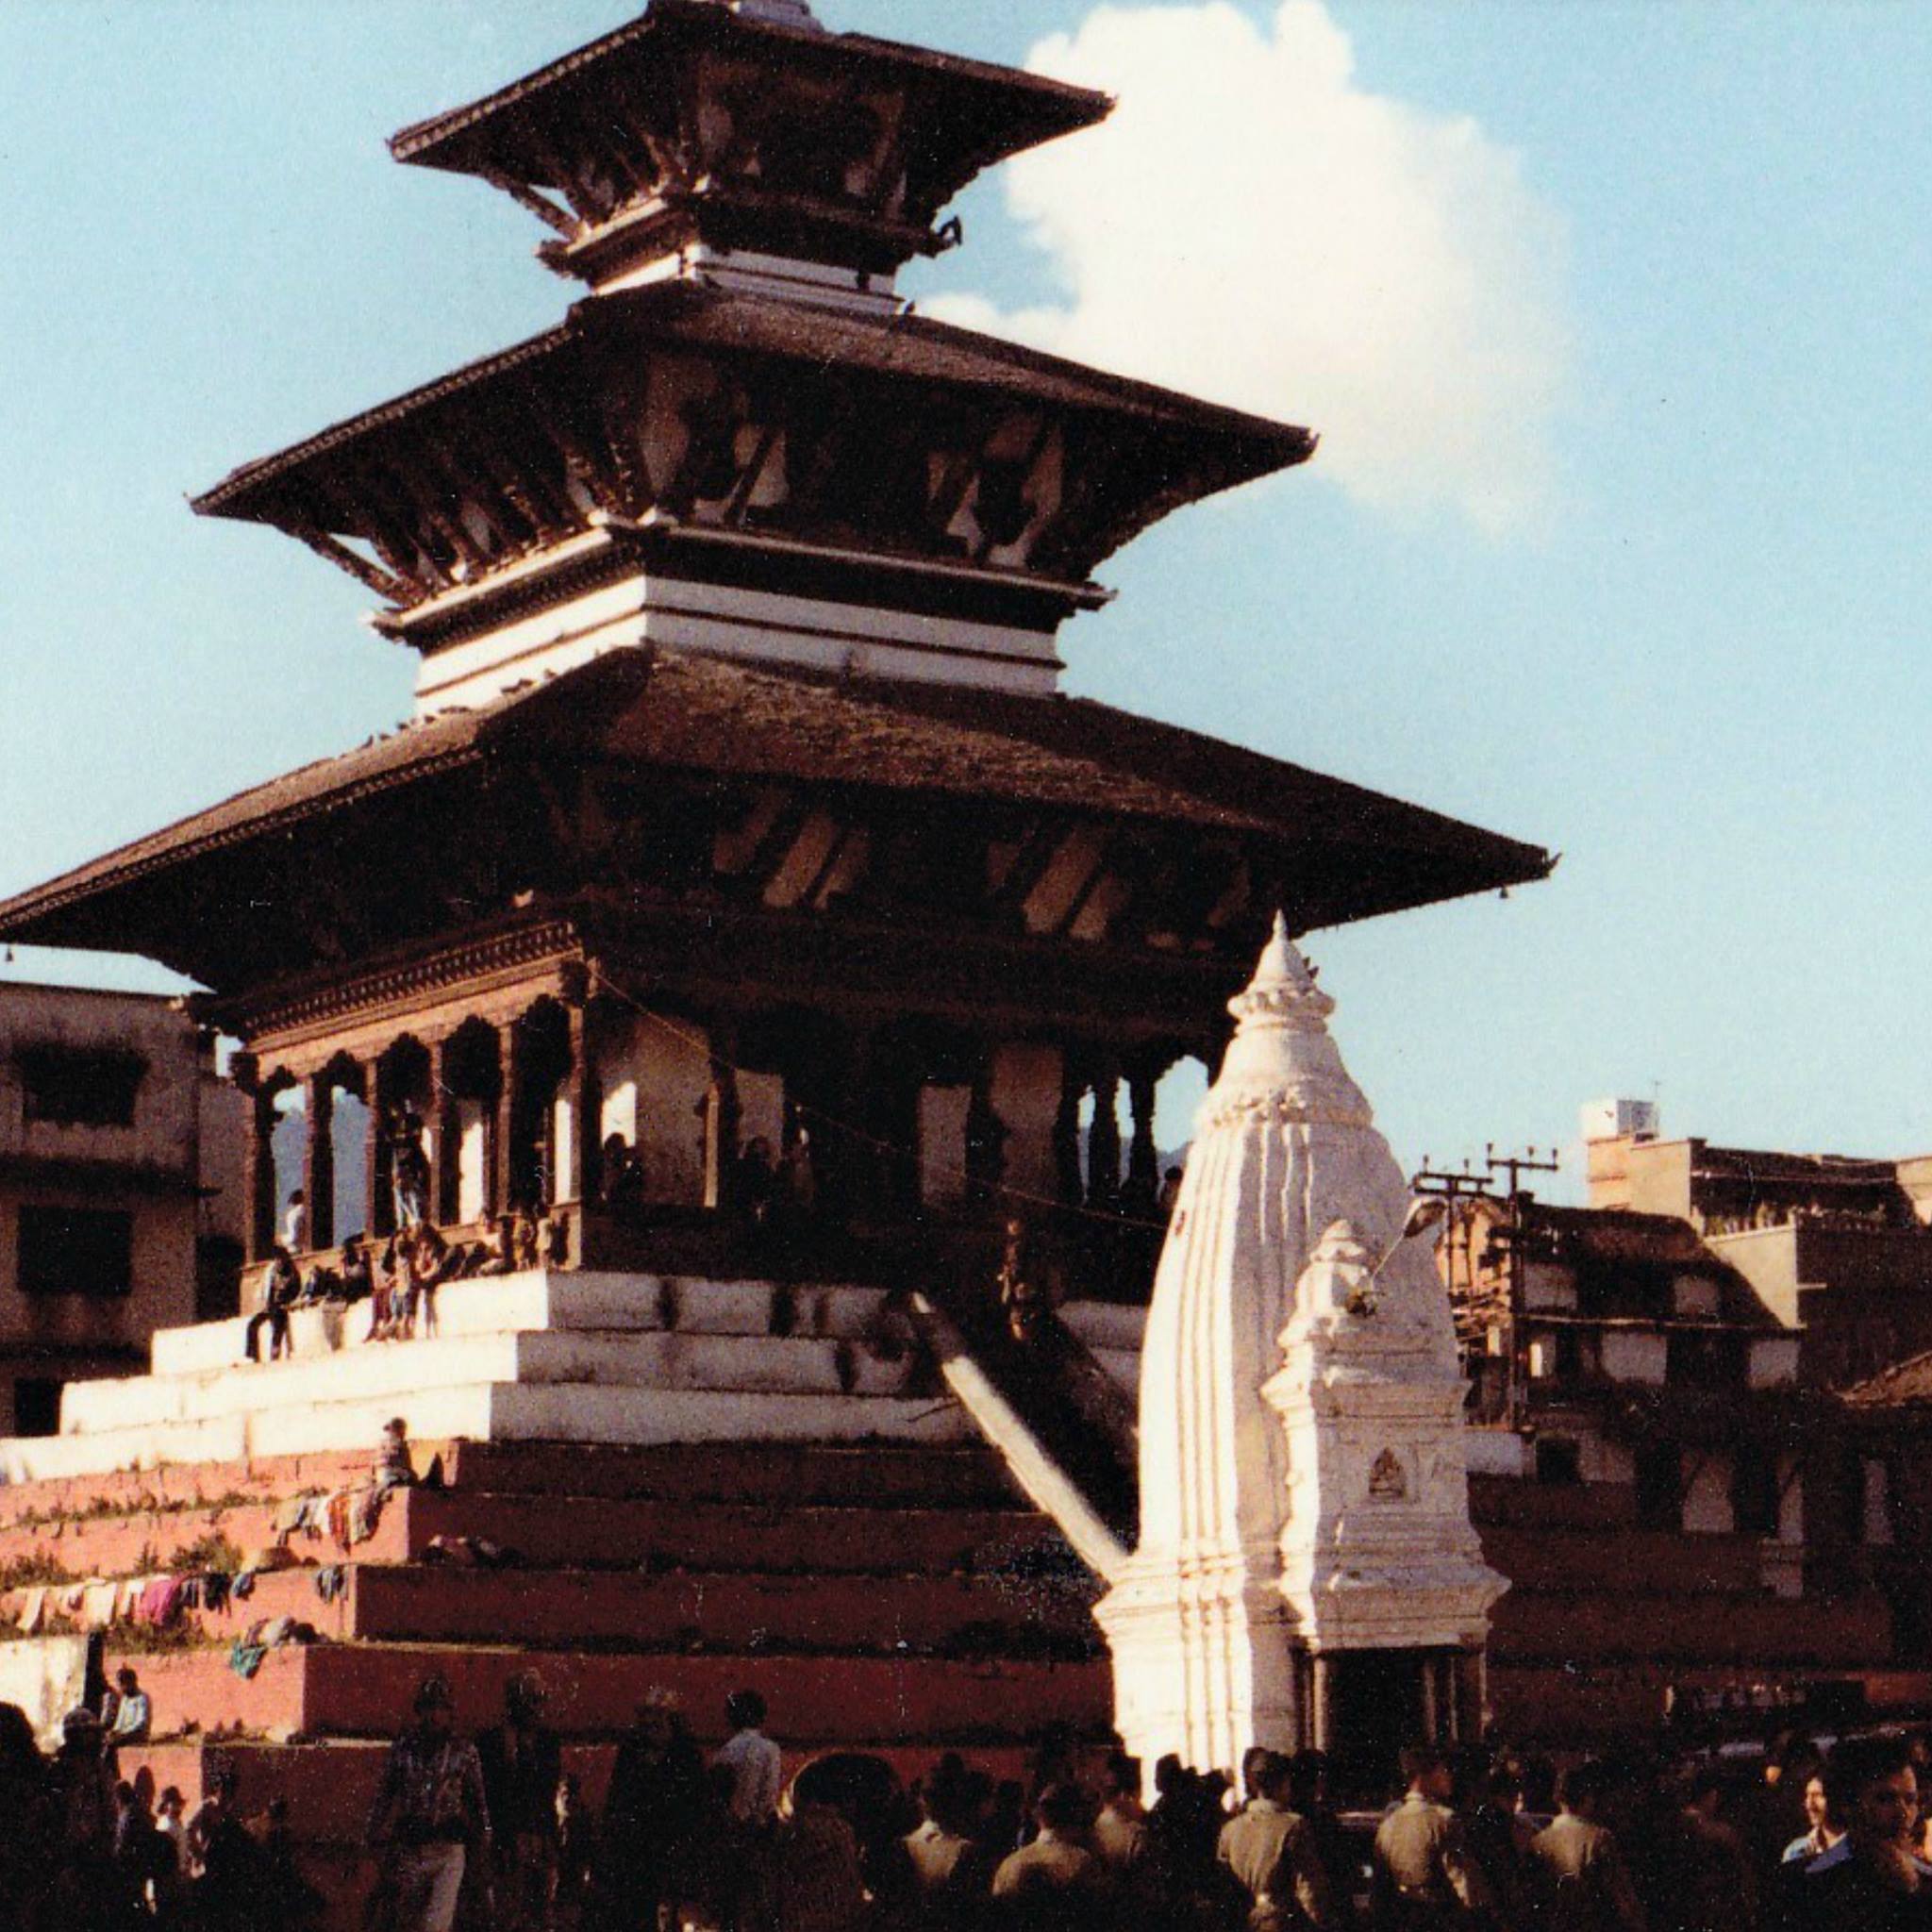 Medieval Pagoda-style Temples in Durbar Square in Kathmandu